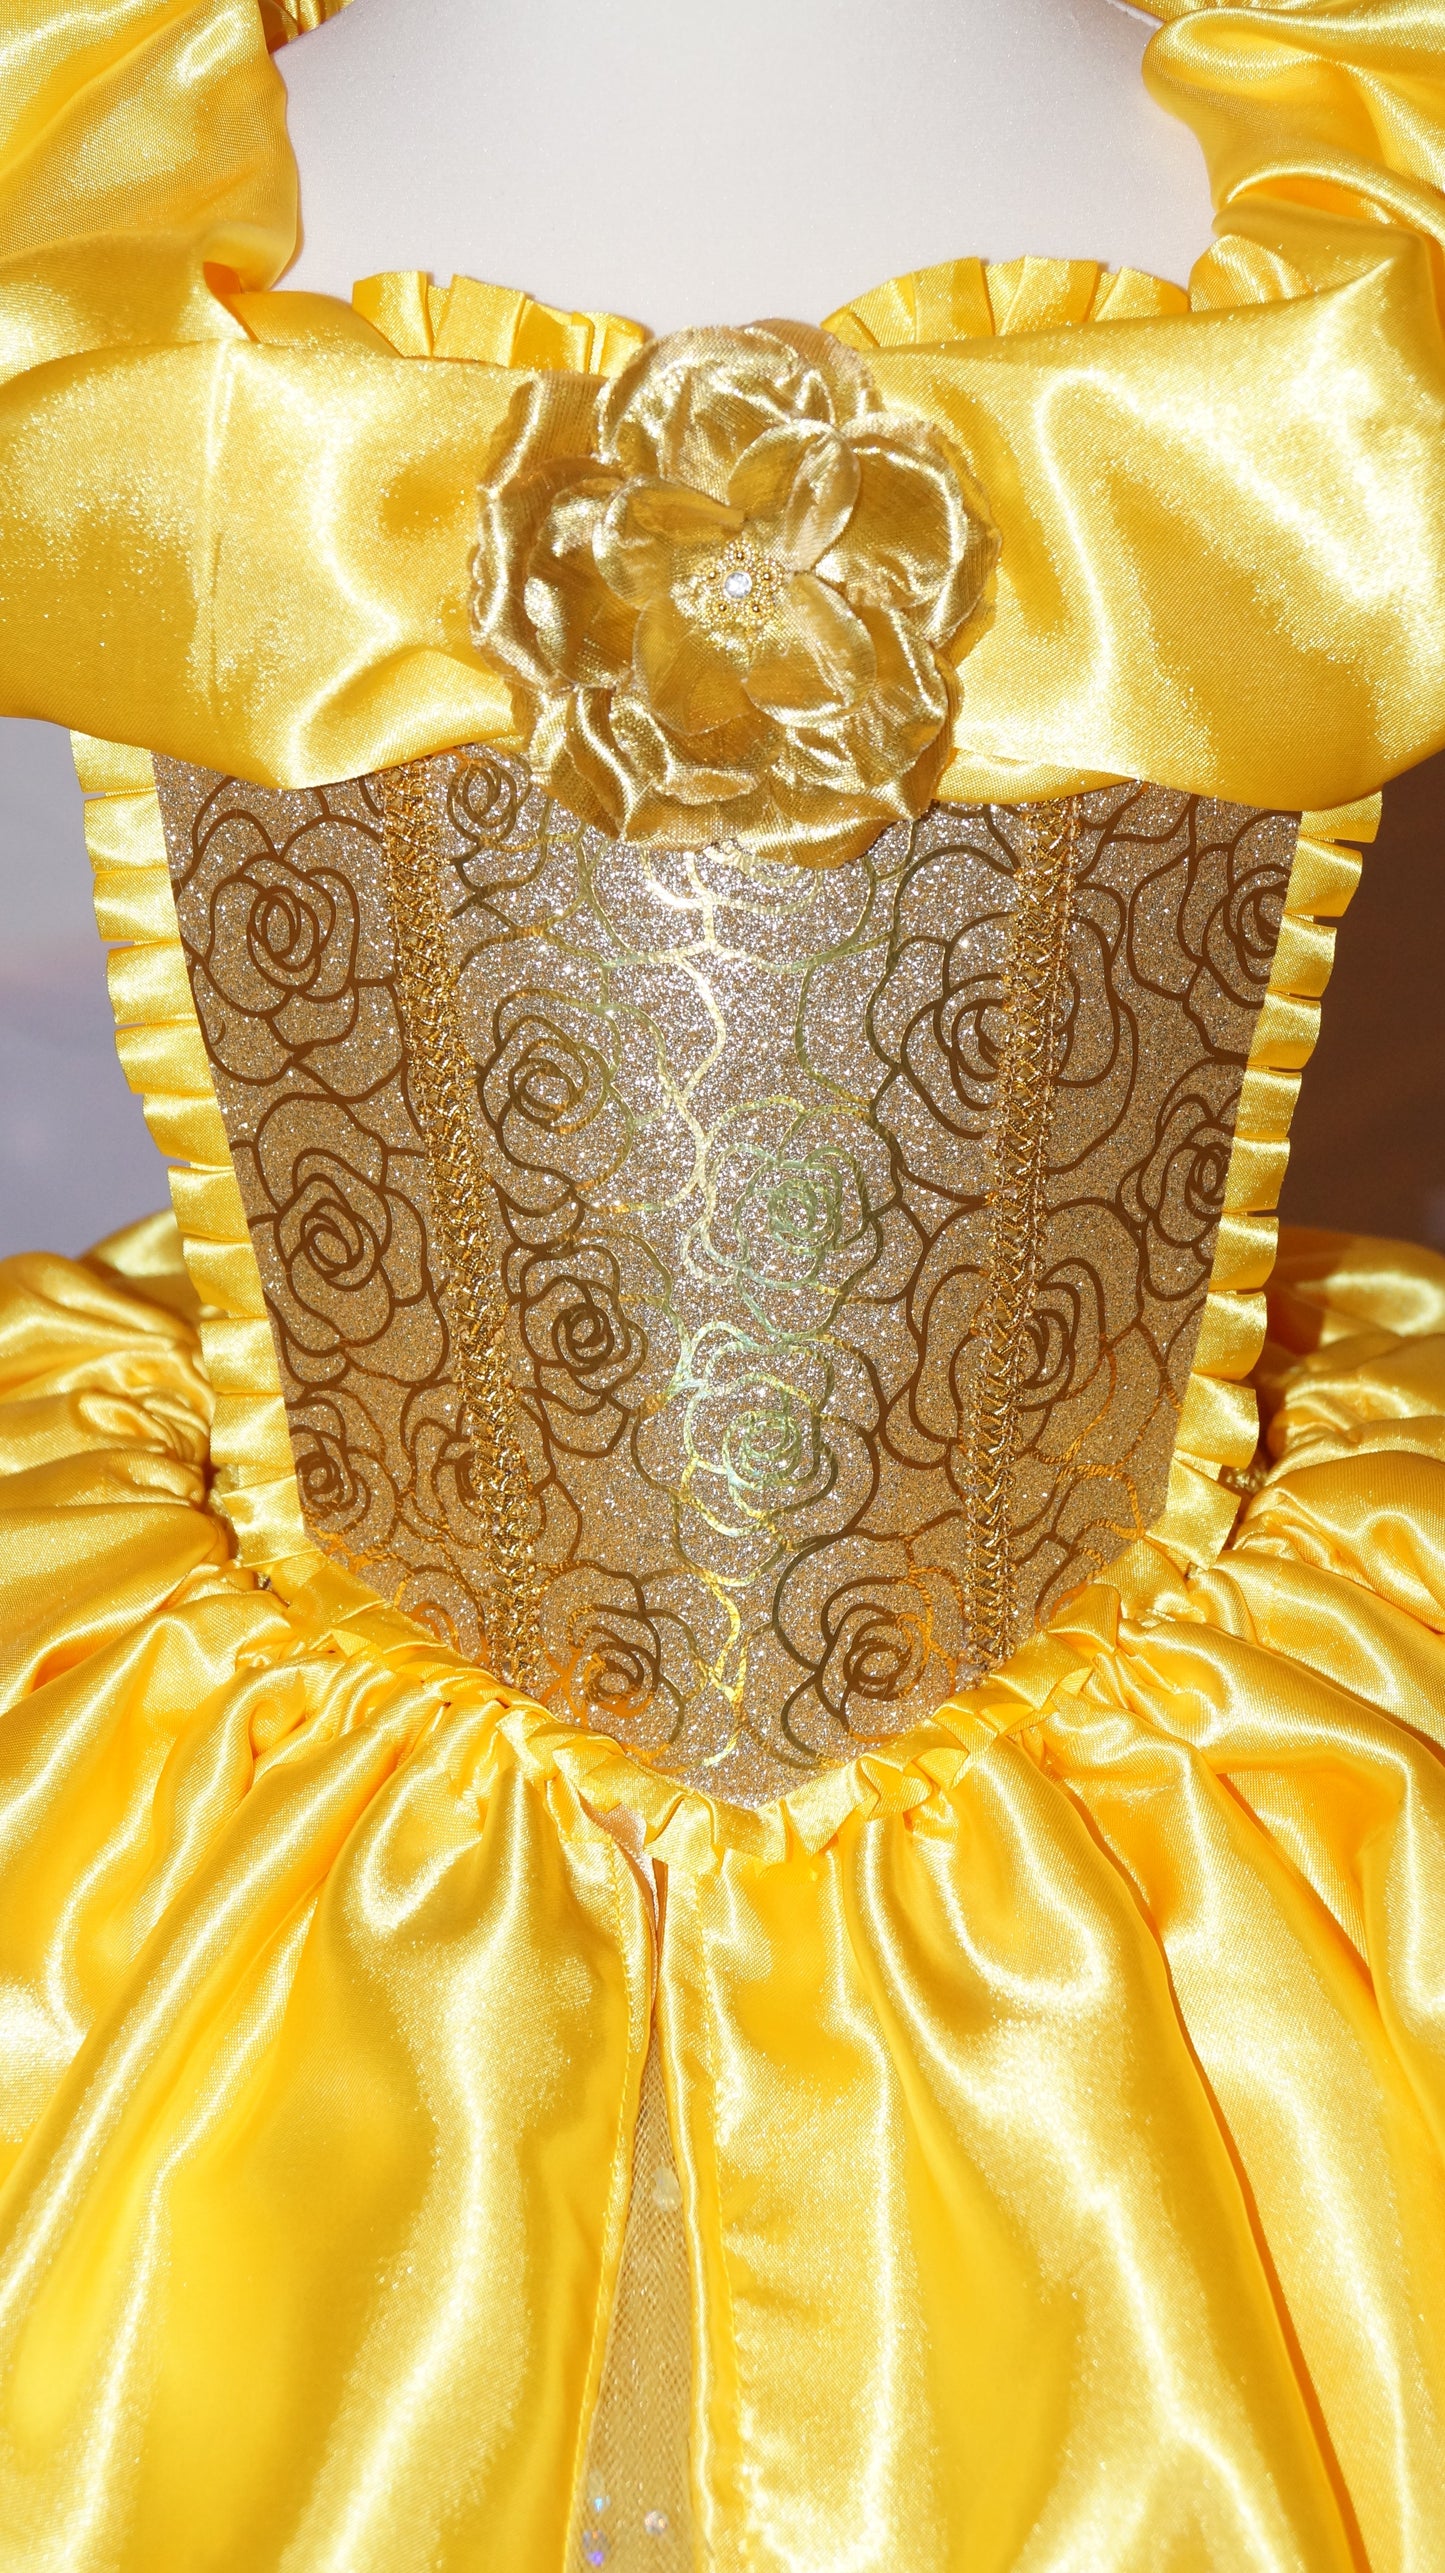 Disney Princess Deluxe Belle Beauty and the Beast Gold Rose Tutu Dress